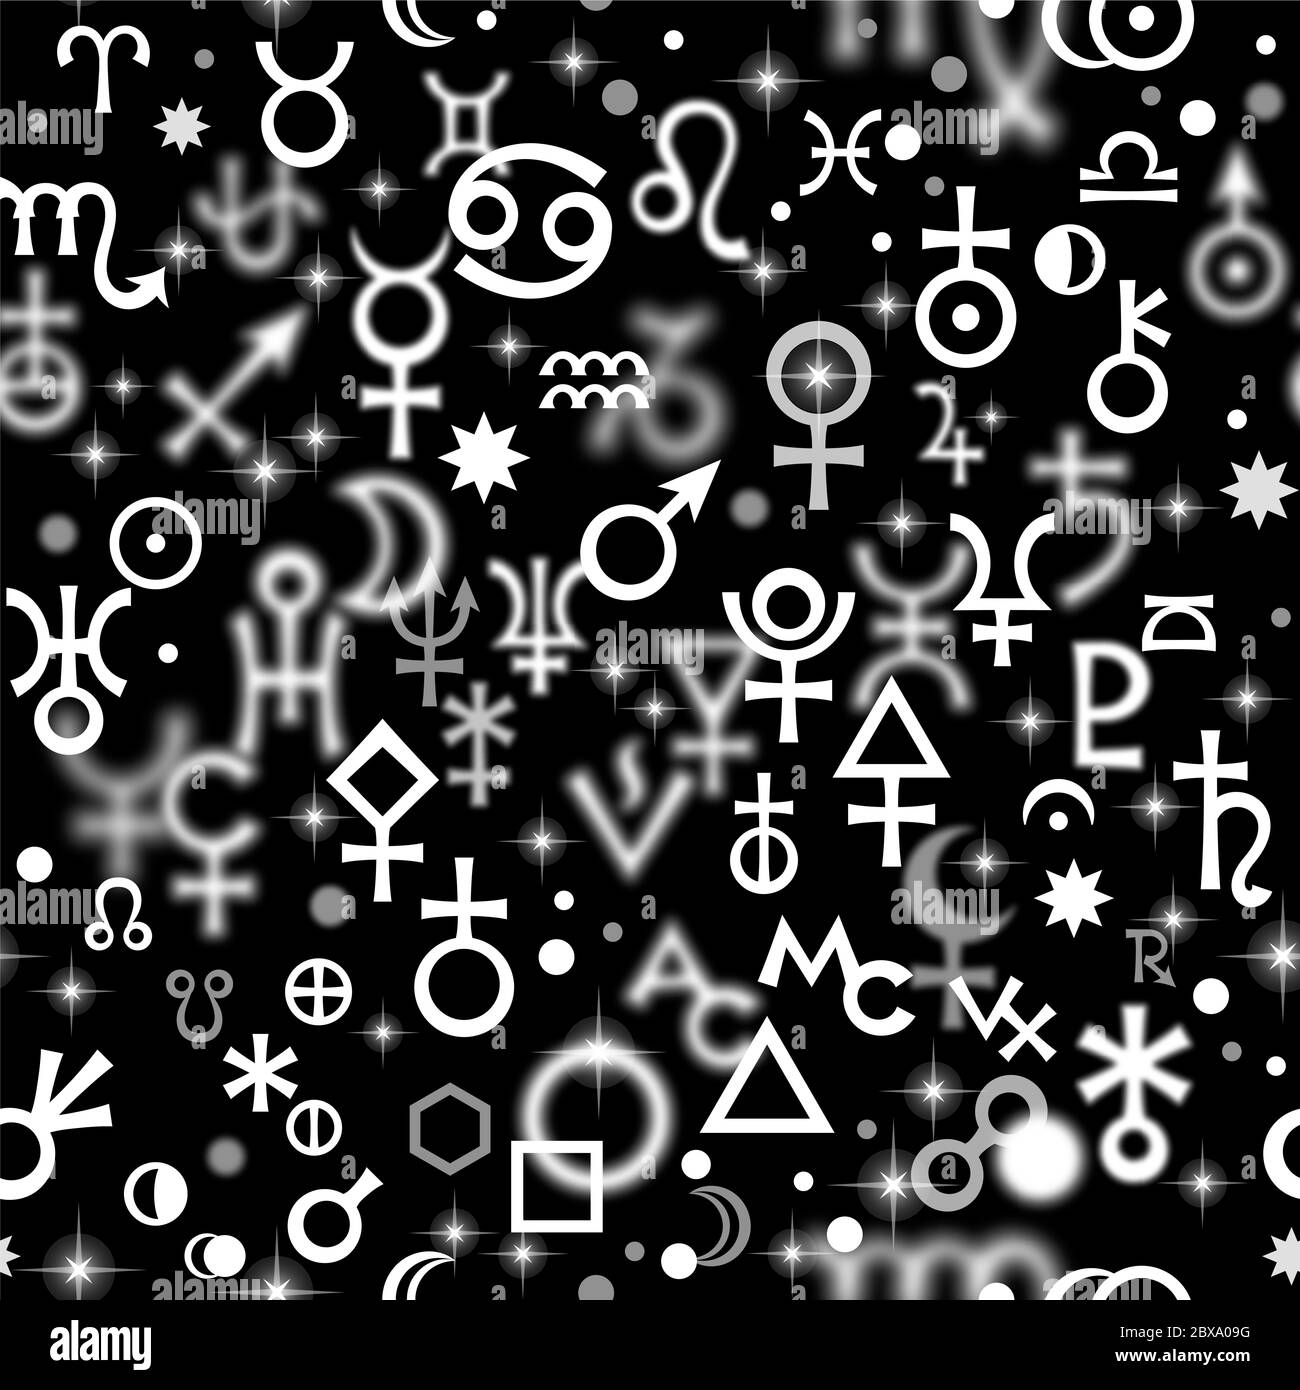 Astrological hieroglyphic signs, Mystic kabbalistic symbols. Chaotic seamless pattern. Stock Photo